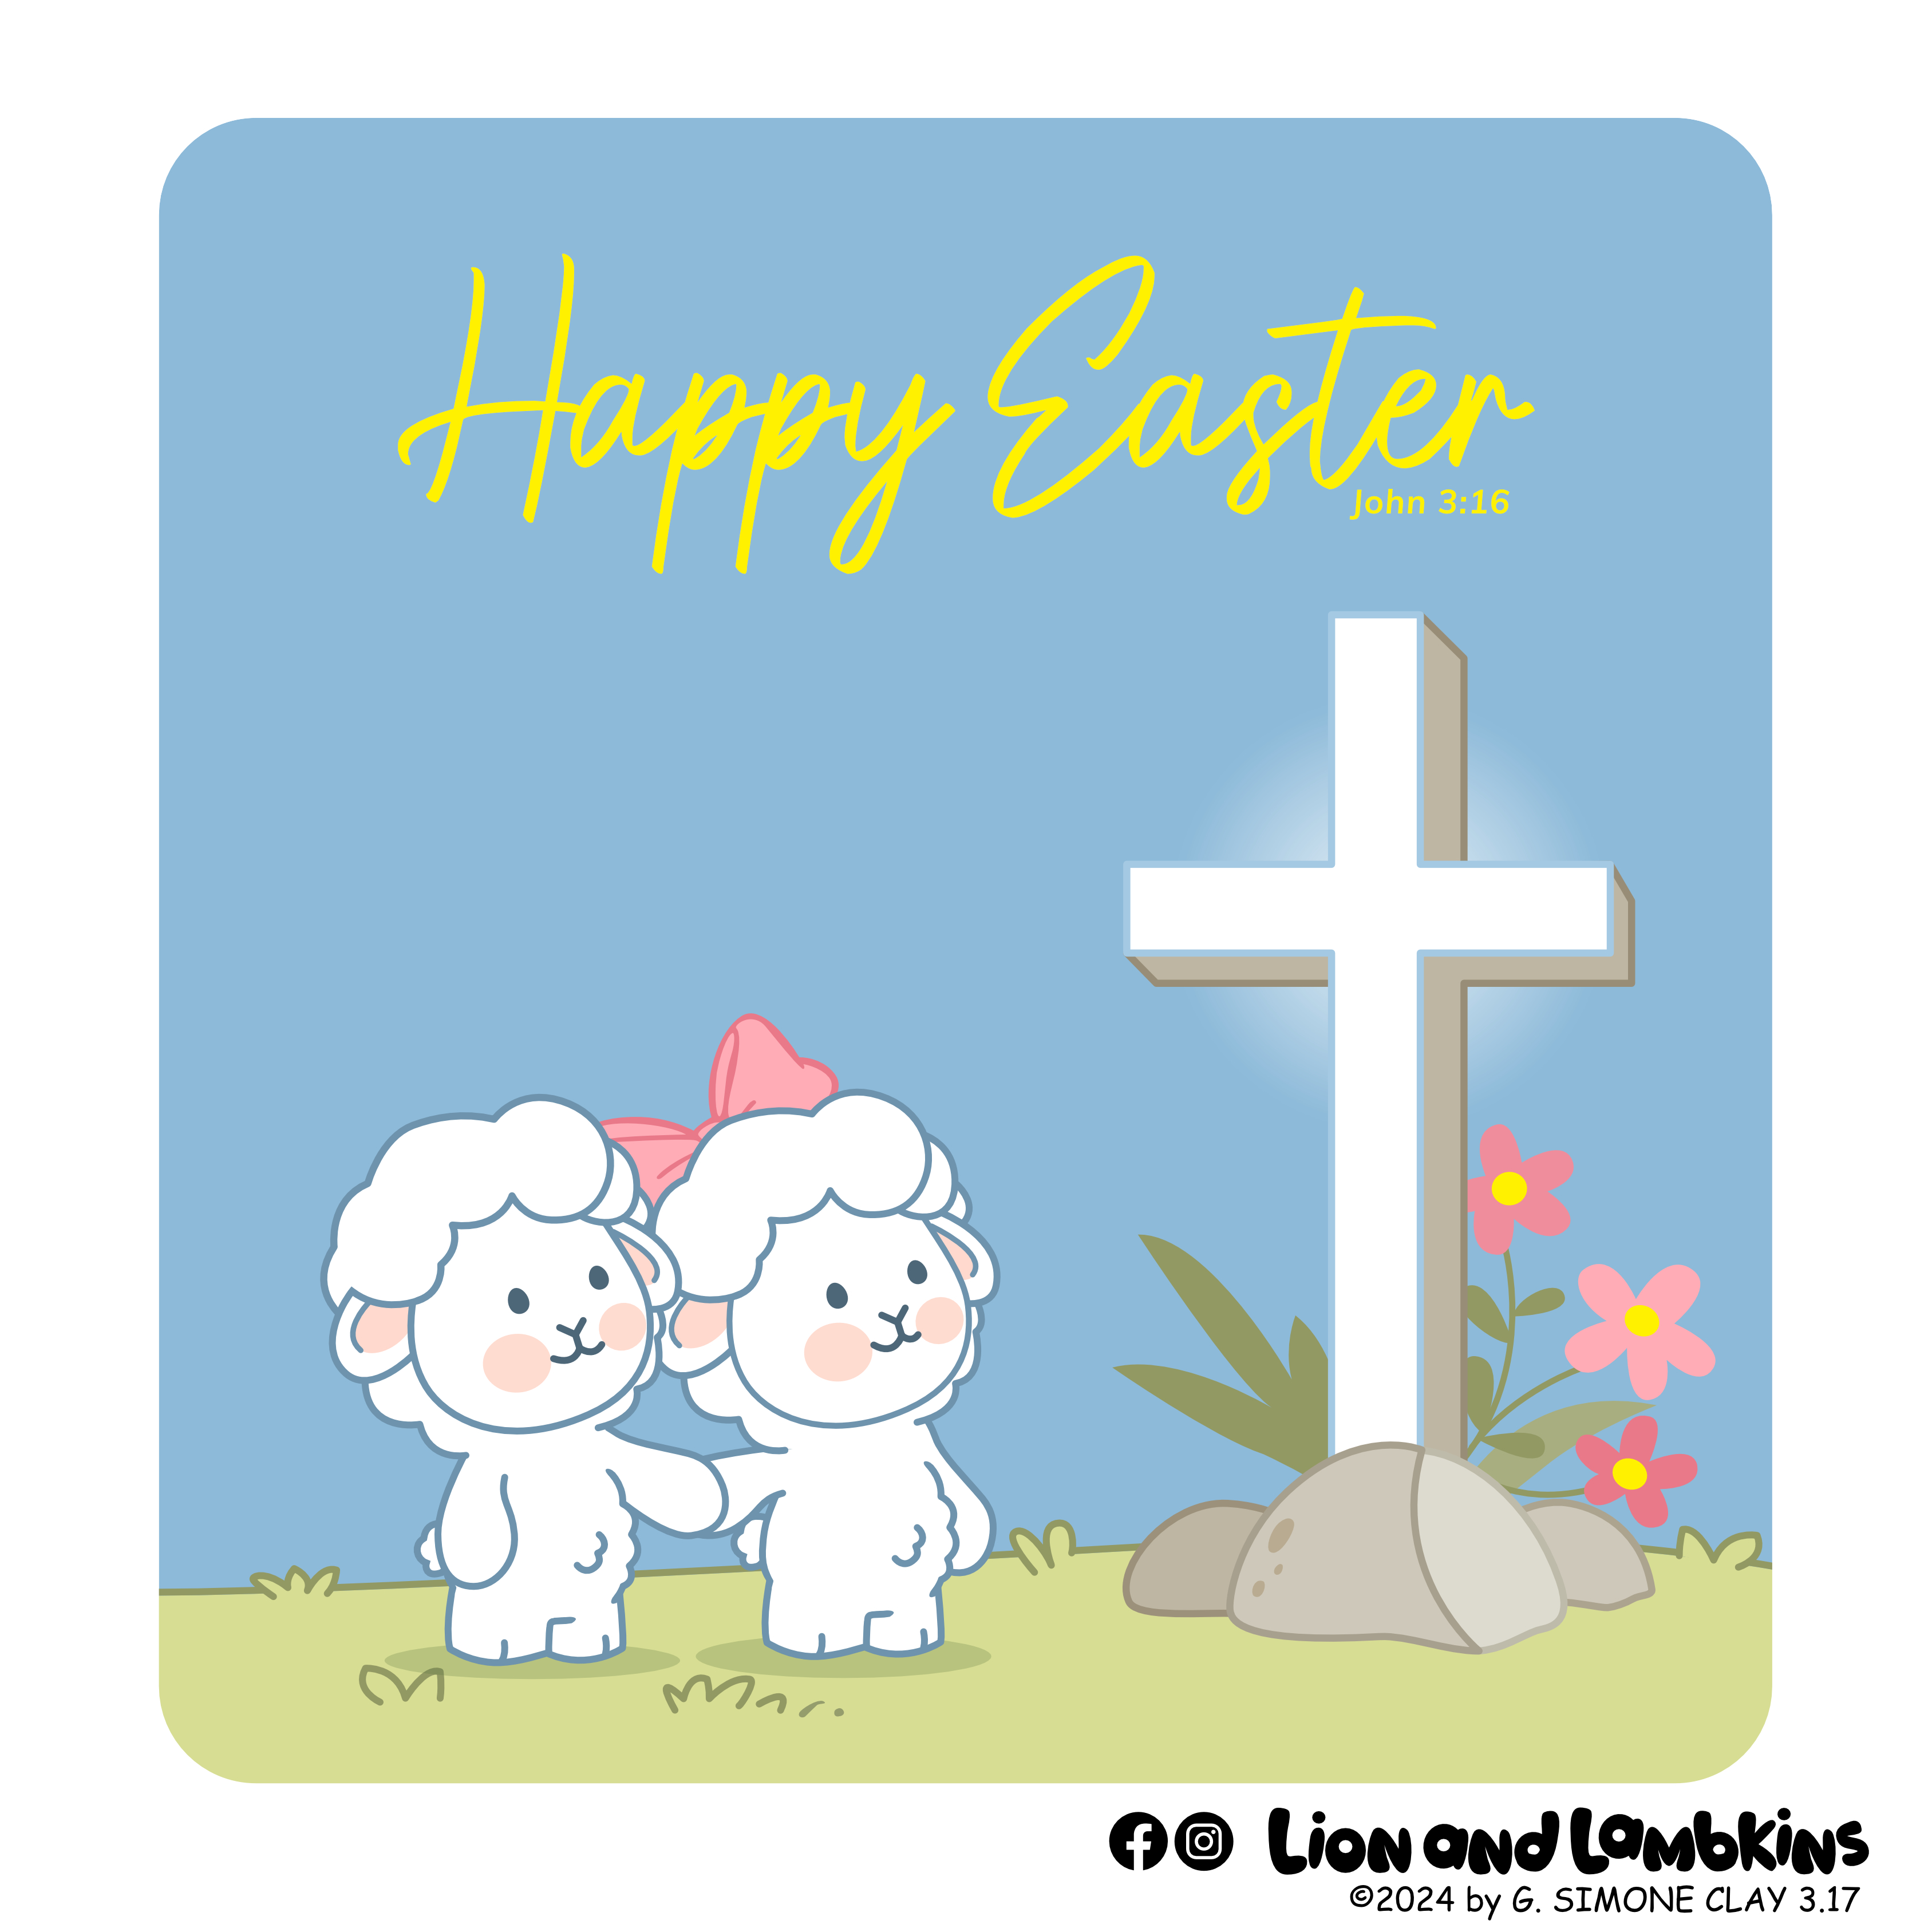 Happy Easter from Lion and Lambkins!